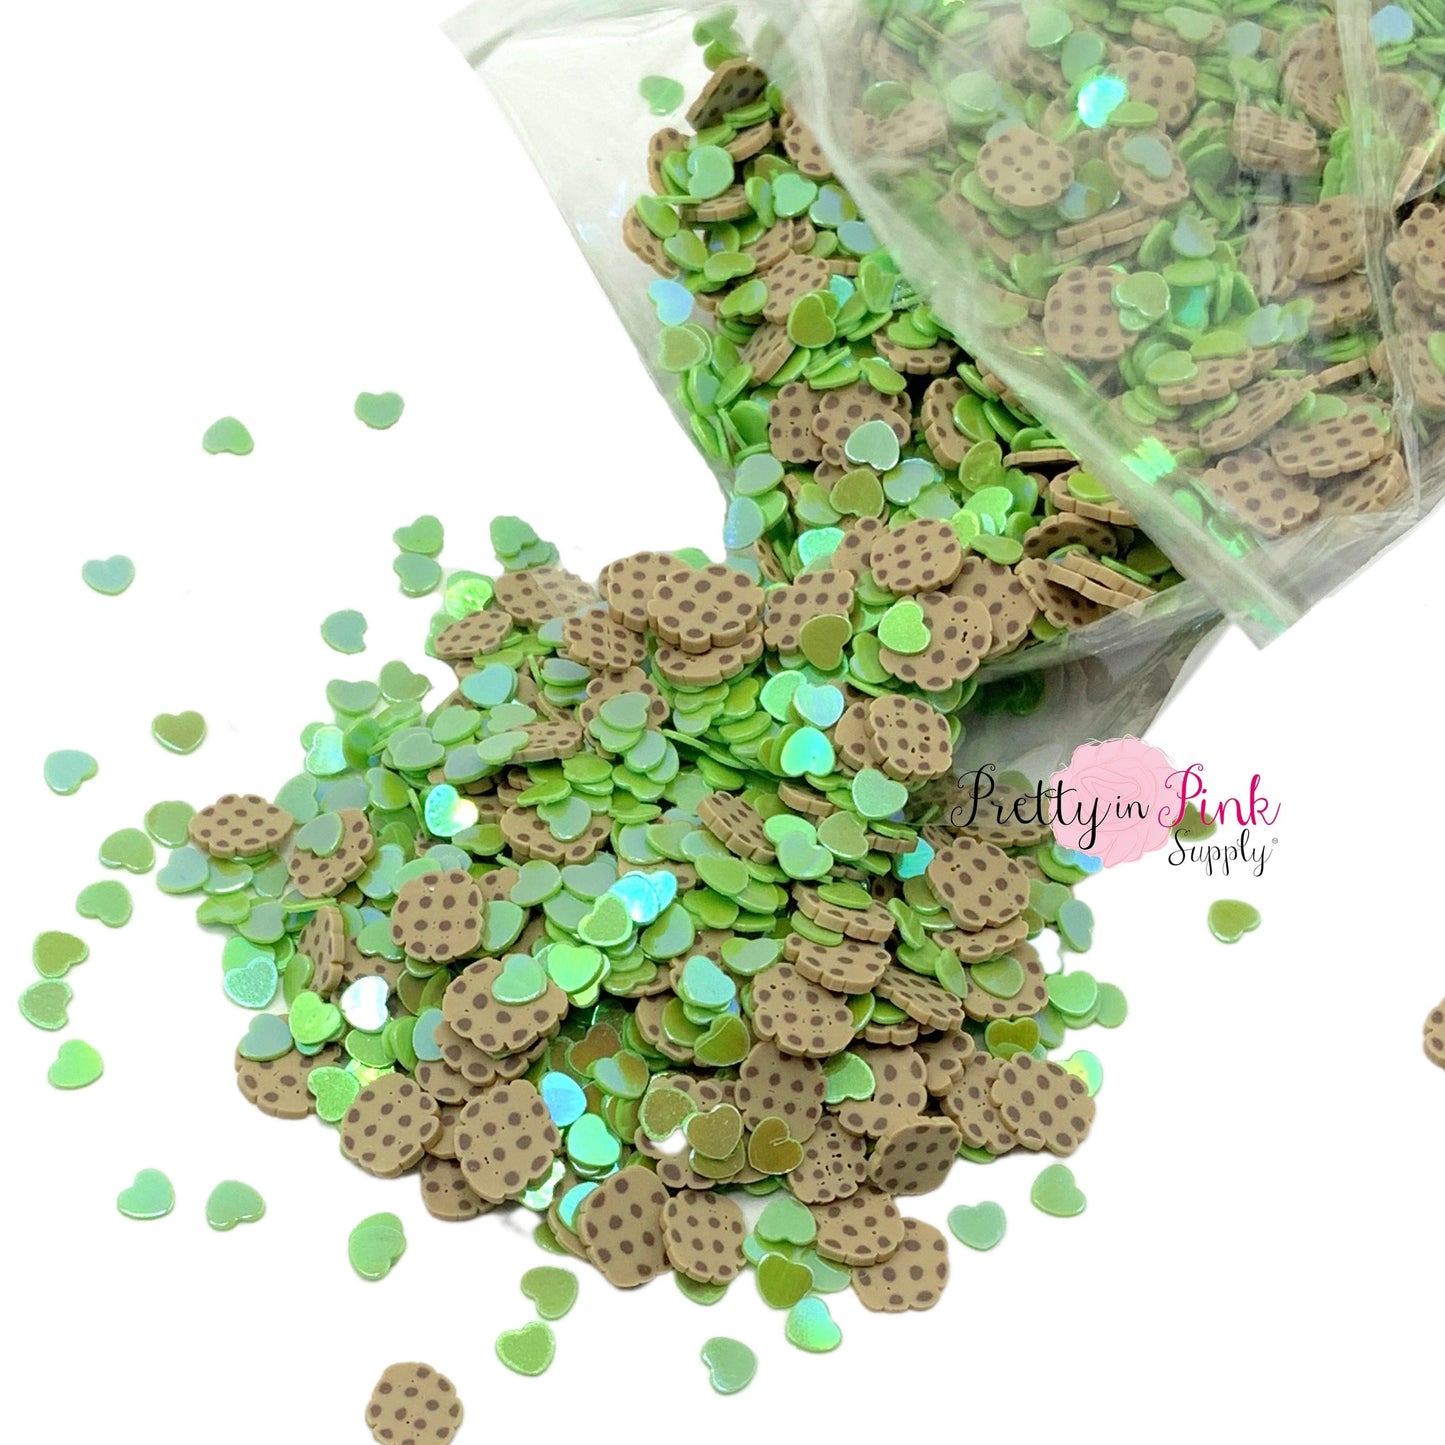 Spilling bag of green heart confetti glitter mixed with cookie clay slices.